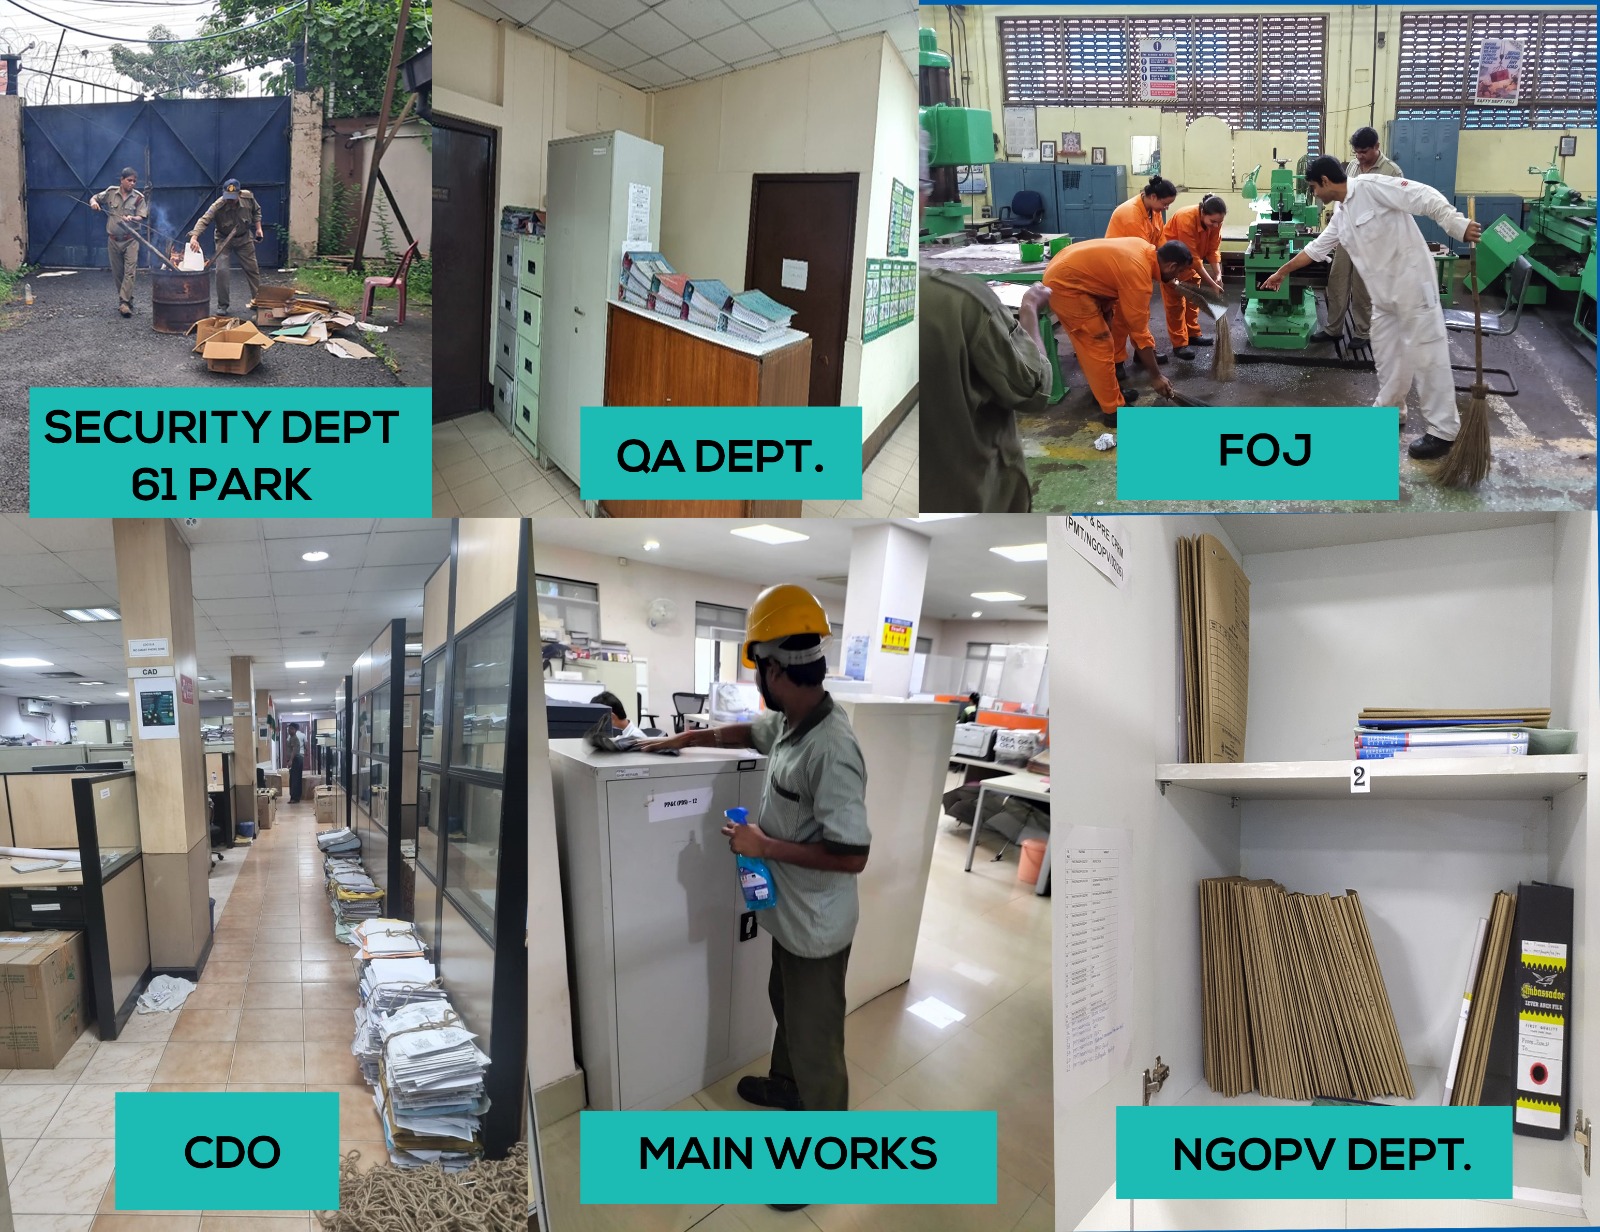 Special Campaign 3.0- ‘SWACHHATA HI SEVA’ - Weeding out of old files & equipments, and cleaning furniture & almirah across departments on 03 Oct 23 - Thumbnail